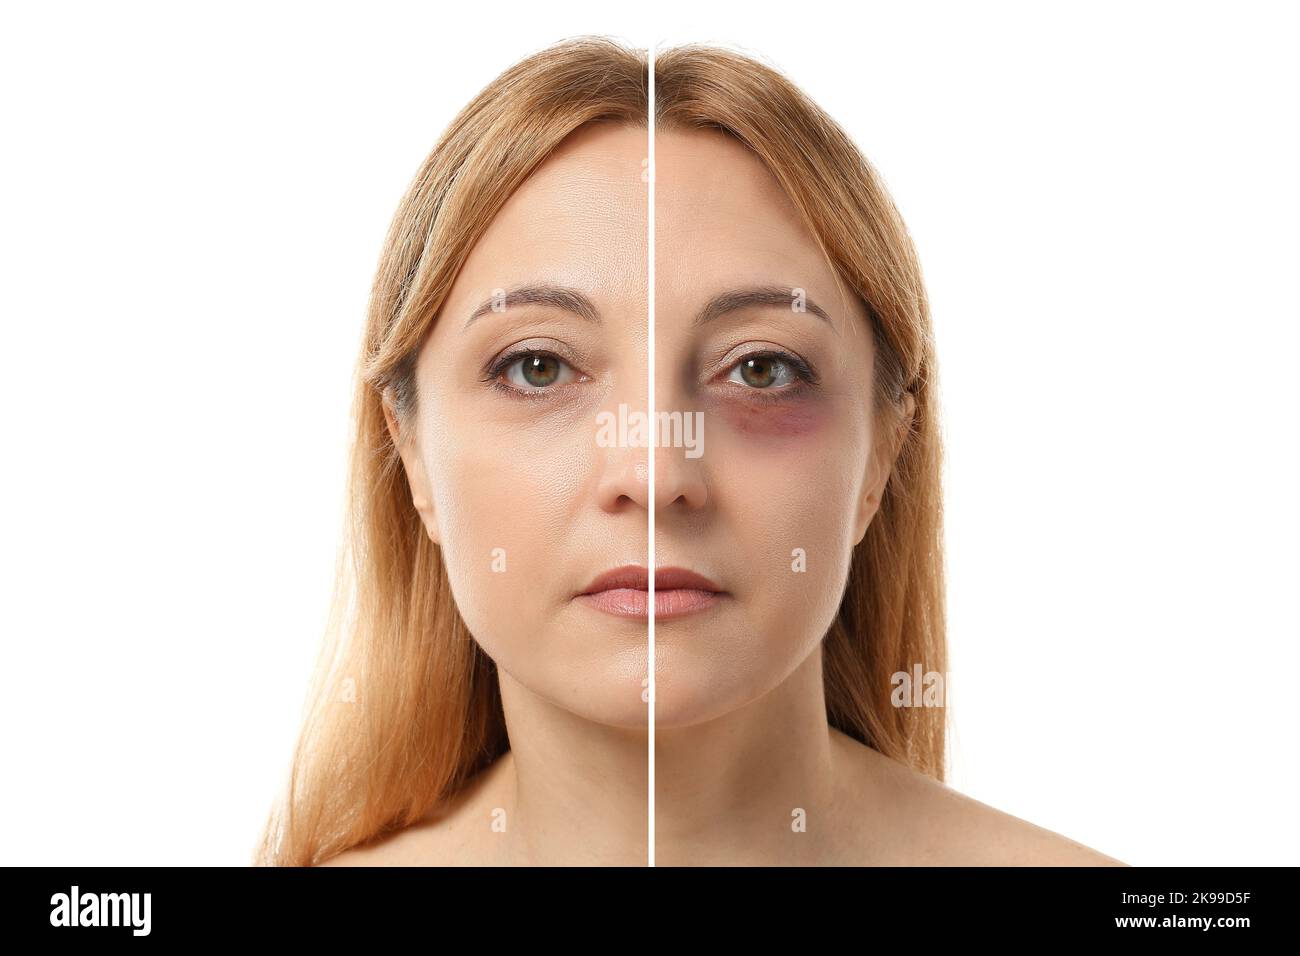 Face of mature woman with and without bruise under eye on white background Stock Photo